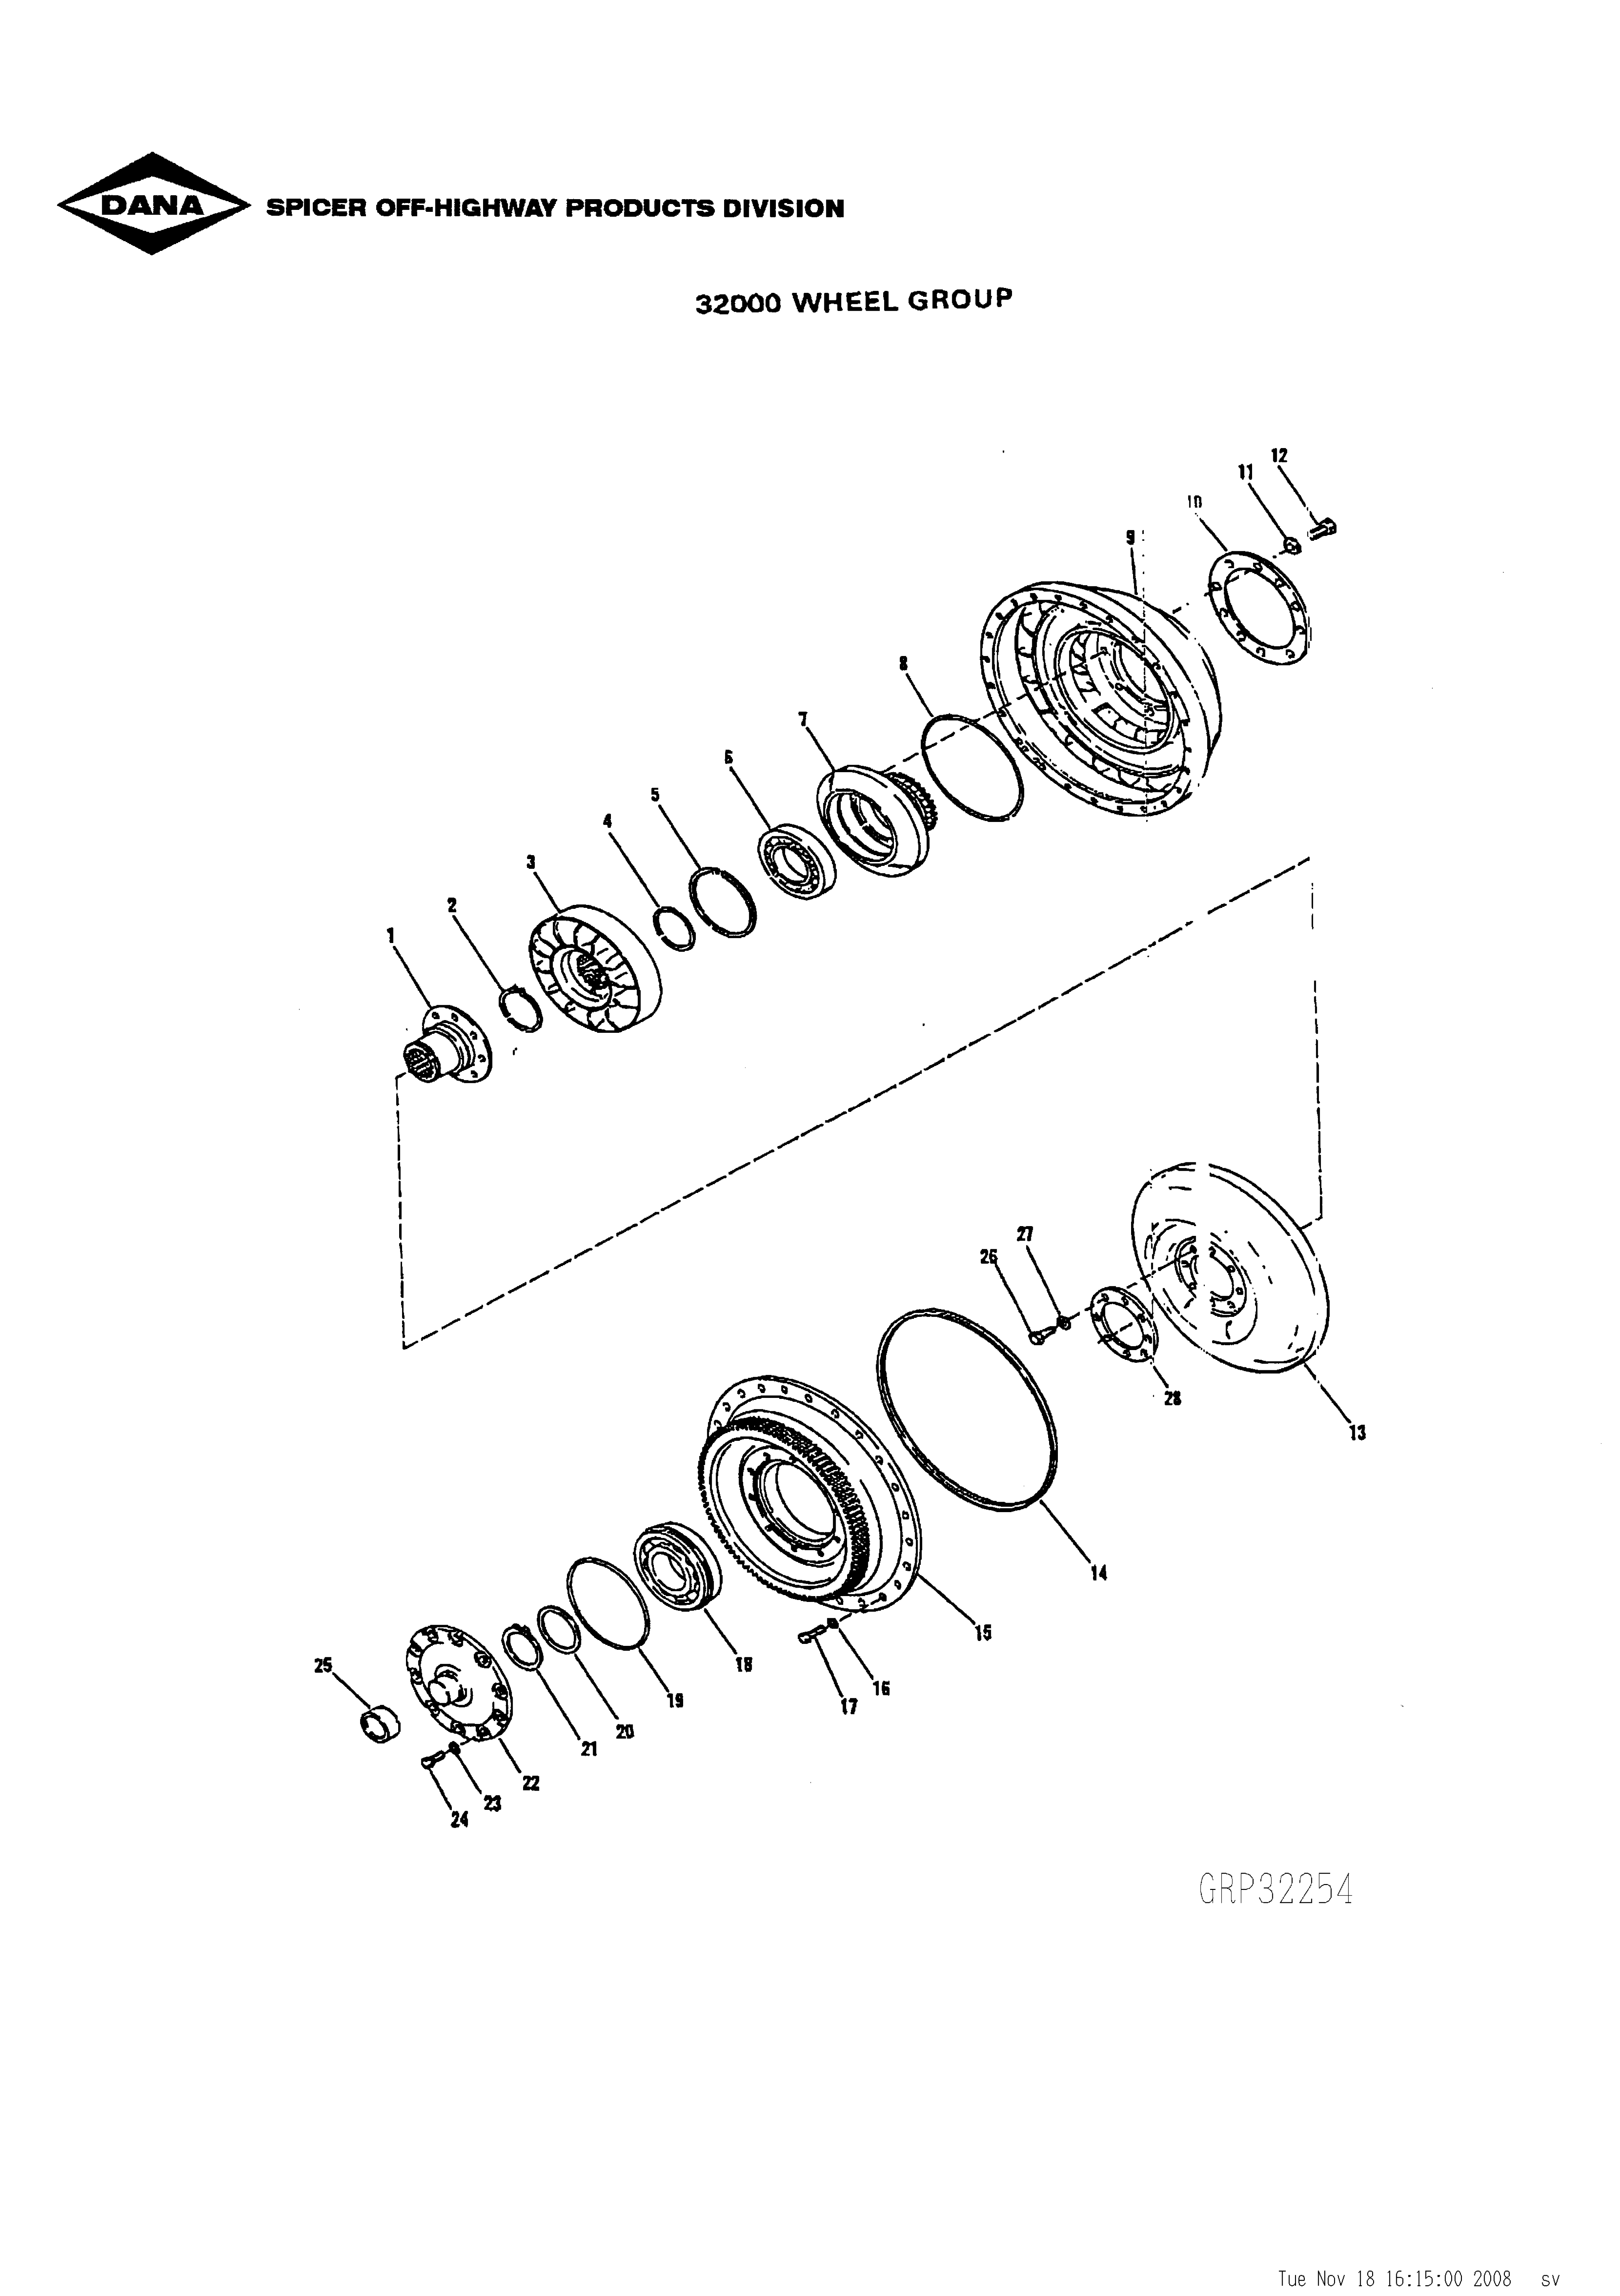 drawing for O & K 203926300 - SNAP RING (figure 5)